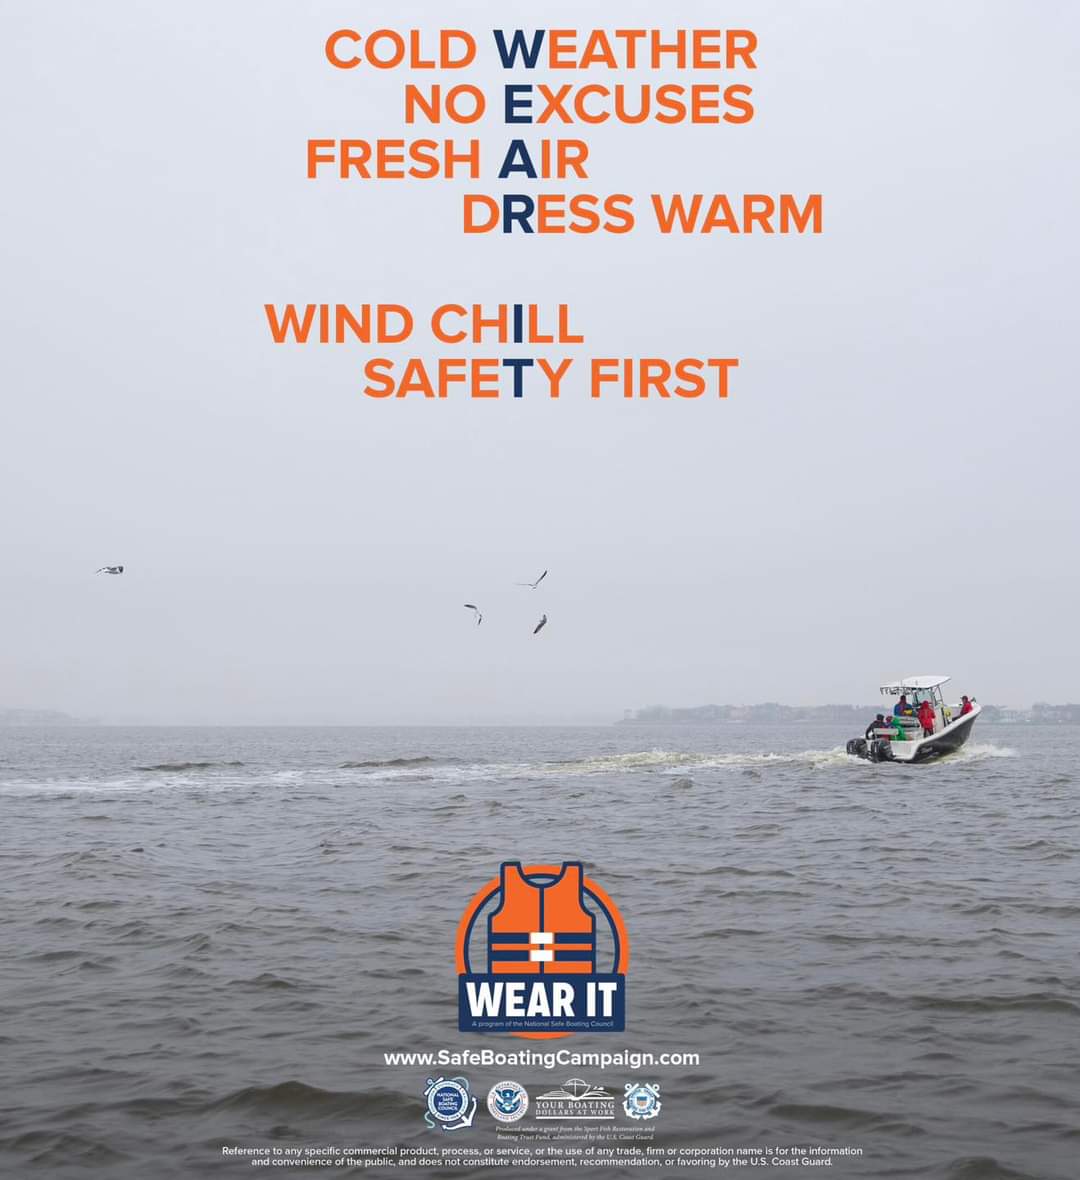 Stay cozy and stay safe!
Even though it may not seem too cold outside, water temperatures can be deadly. Make sure to dress for the water temperature, and ALWAYS WEAR your life jacket.
#WearIt #WaterSafety
#SemperParatus #USCG
#GoCoastGuard #CoastGuard